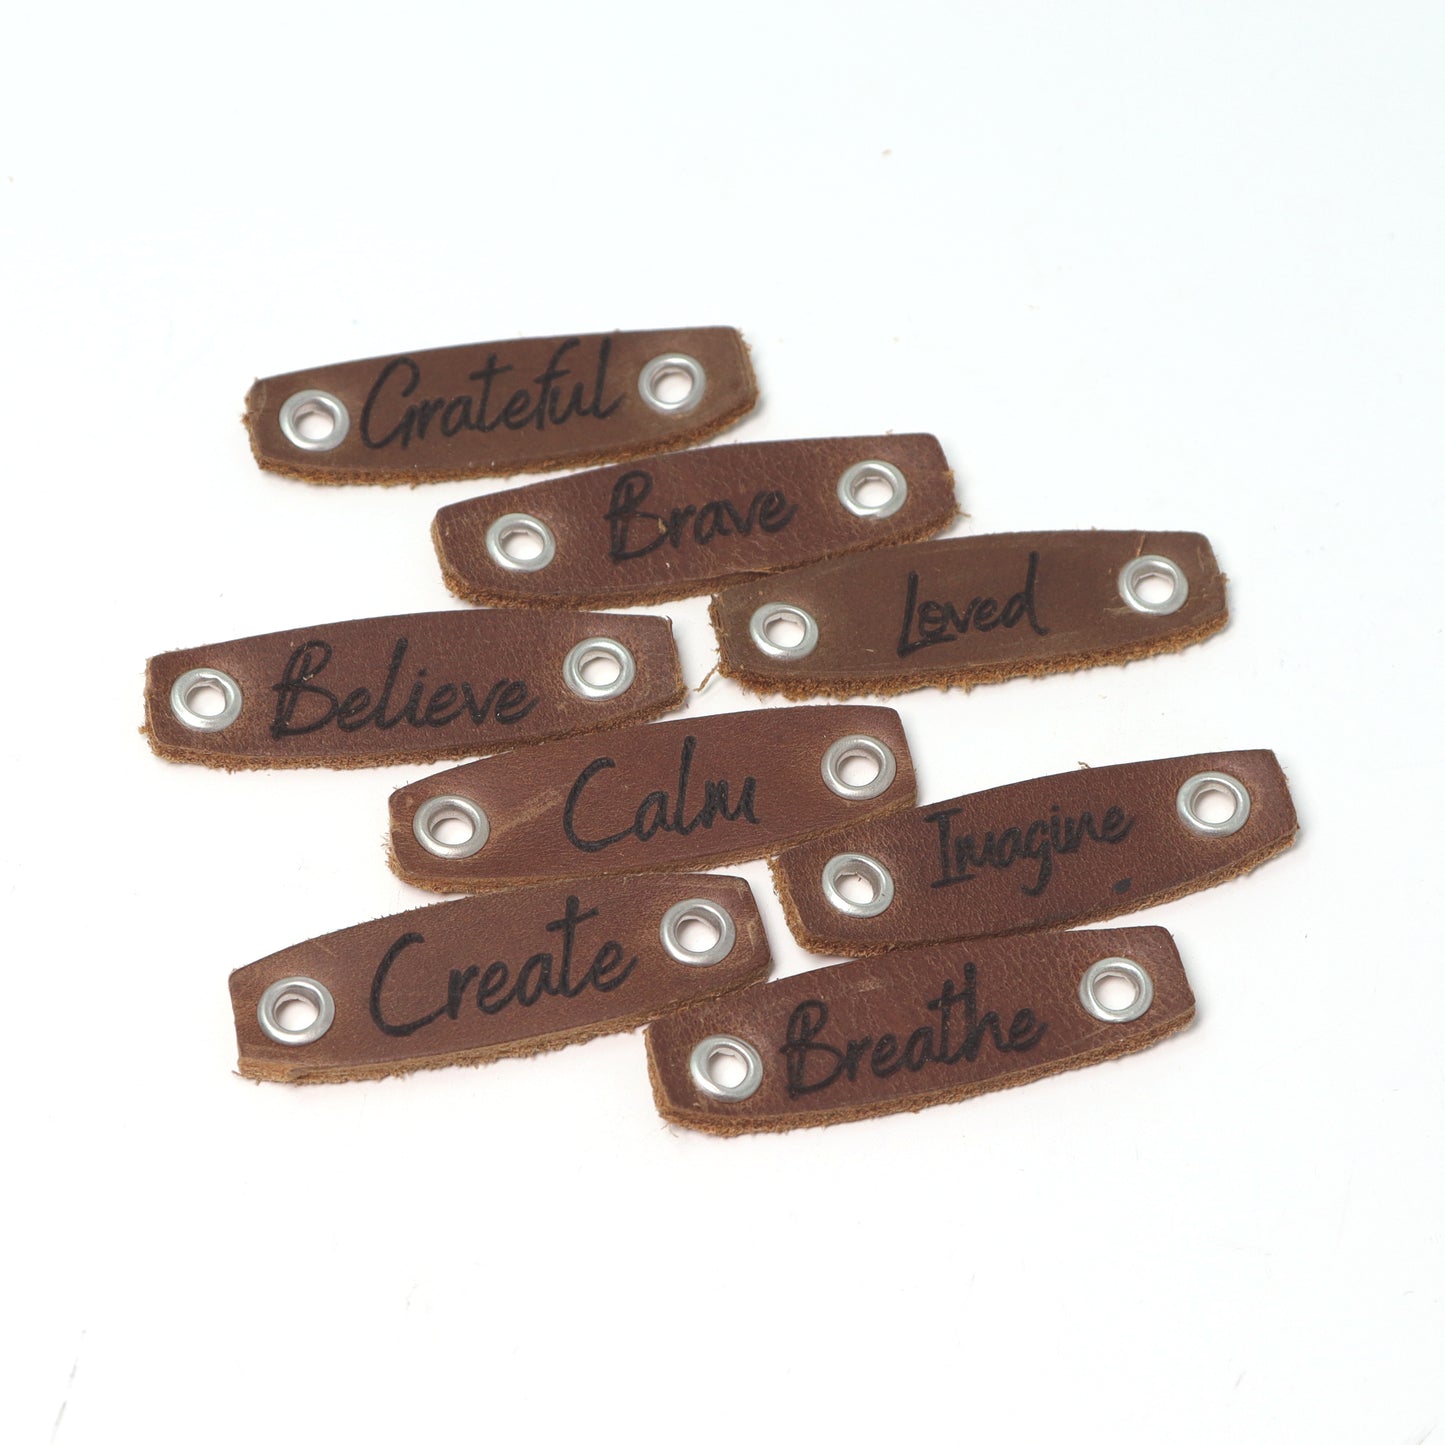 Interchangeable Bracelets - Word Patches - Leather